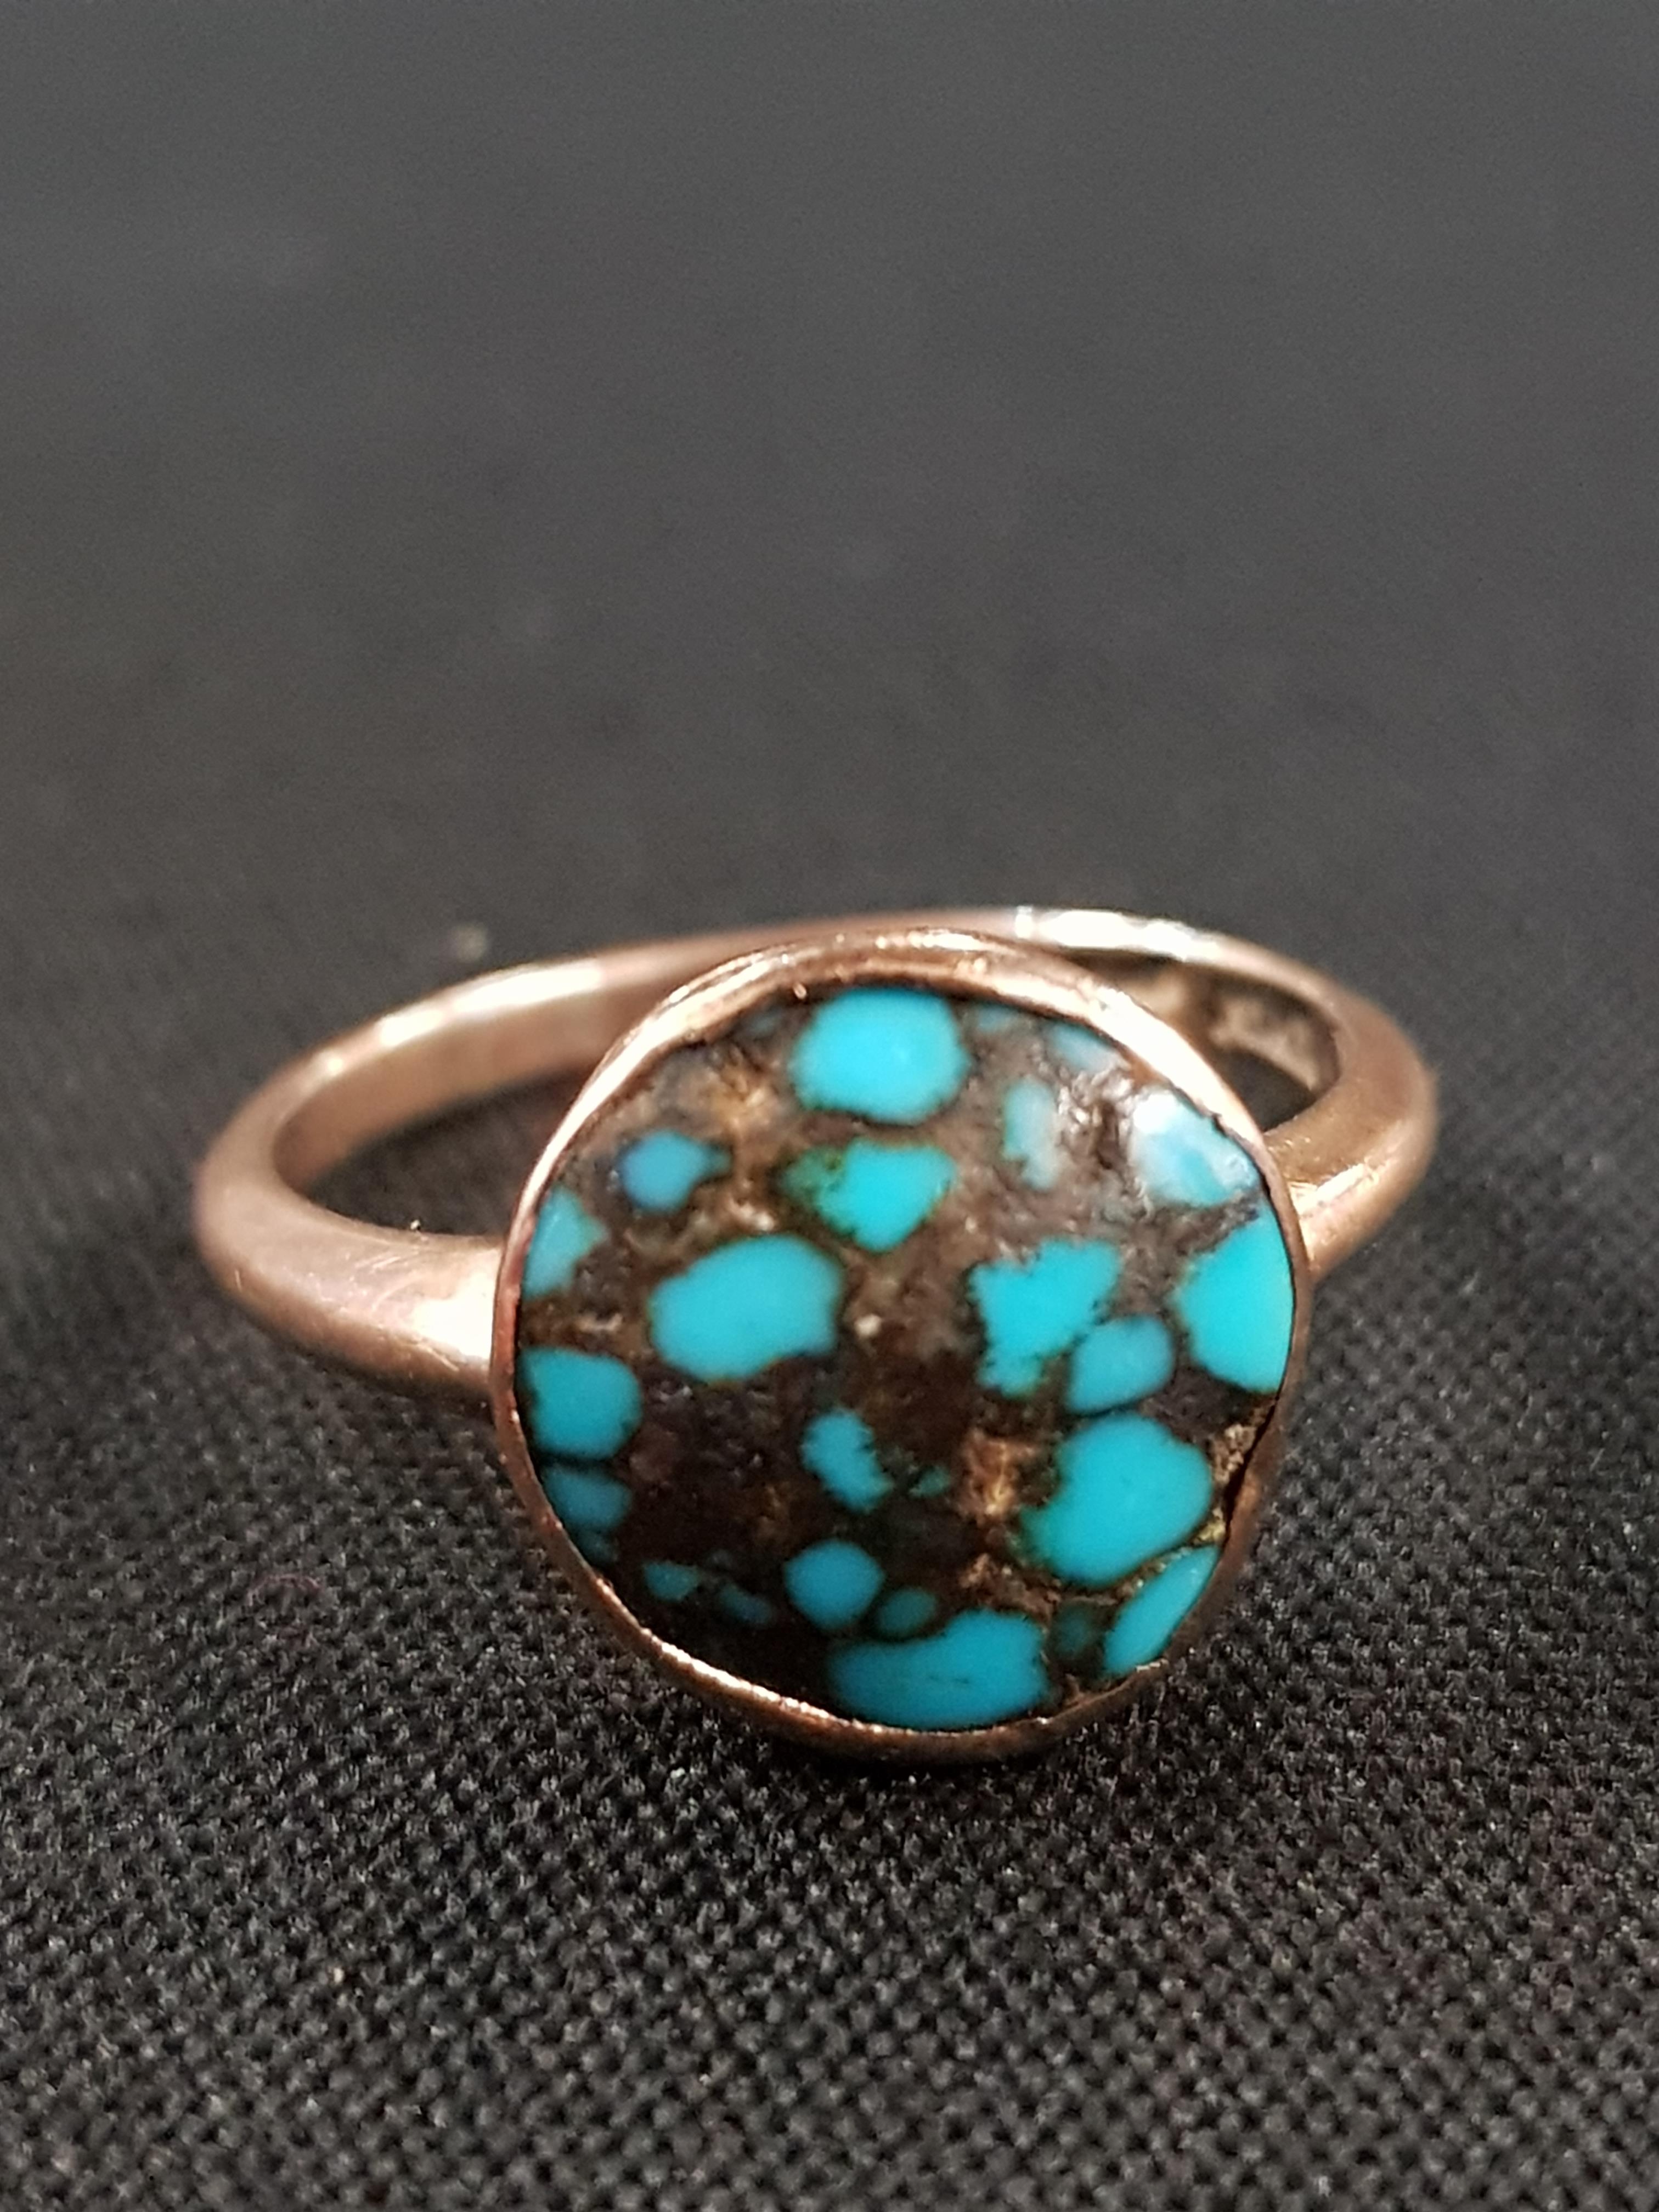 ANTIQUE 9CT GOLD TURQUOISE SET RING